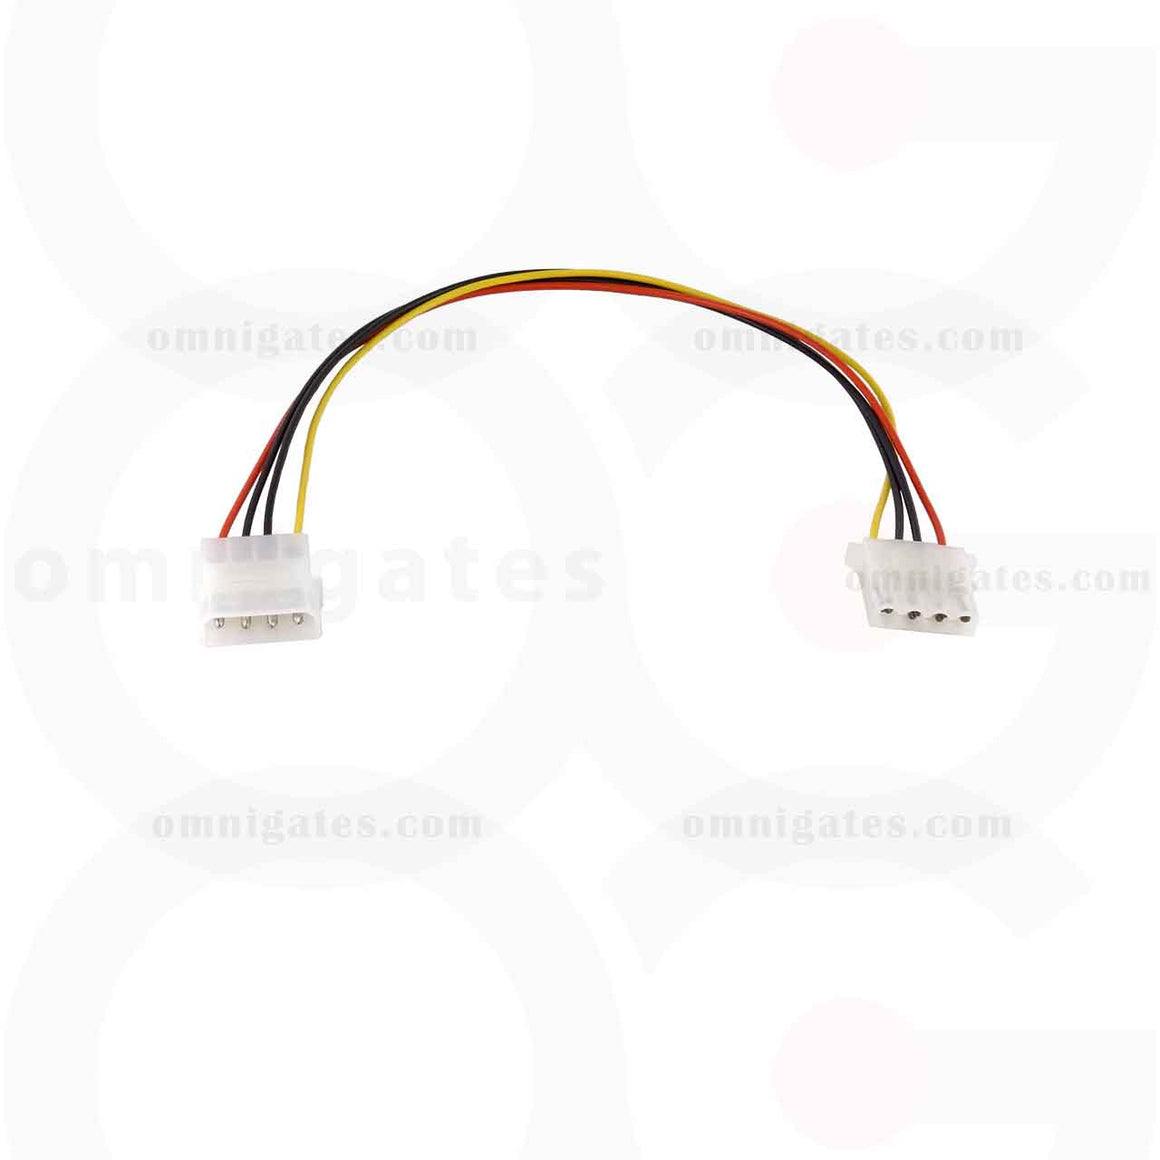 5.25 Male to 5.25 Female, Internal DC Adaptor Cable, 12 inches